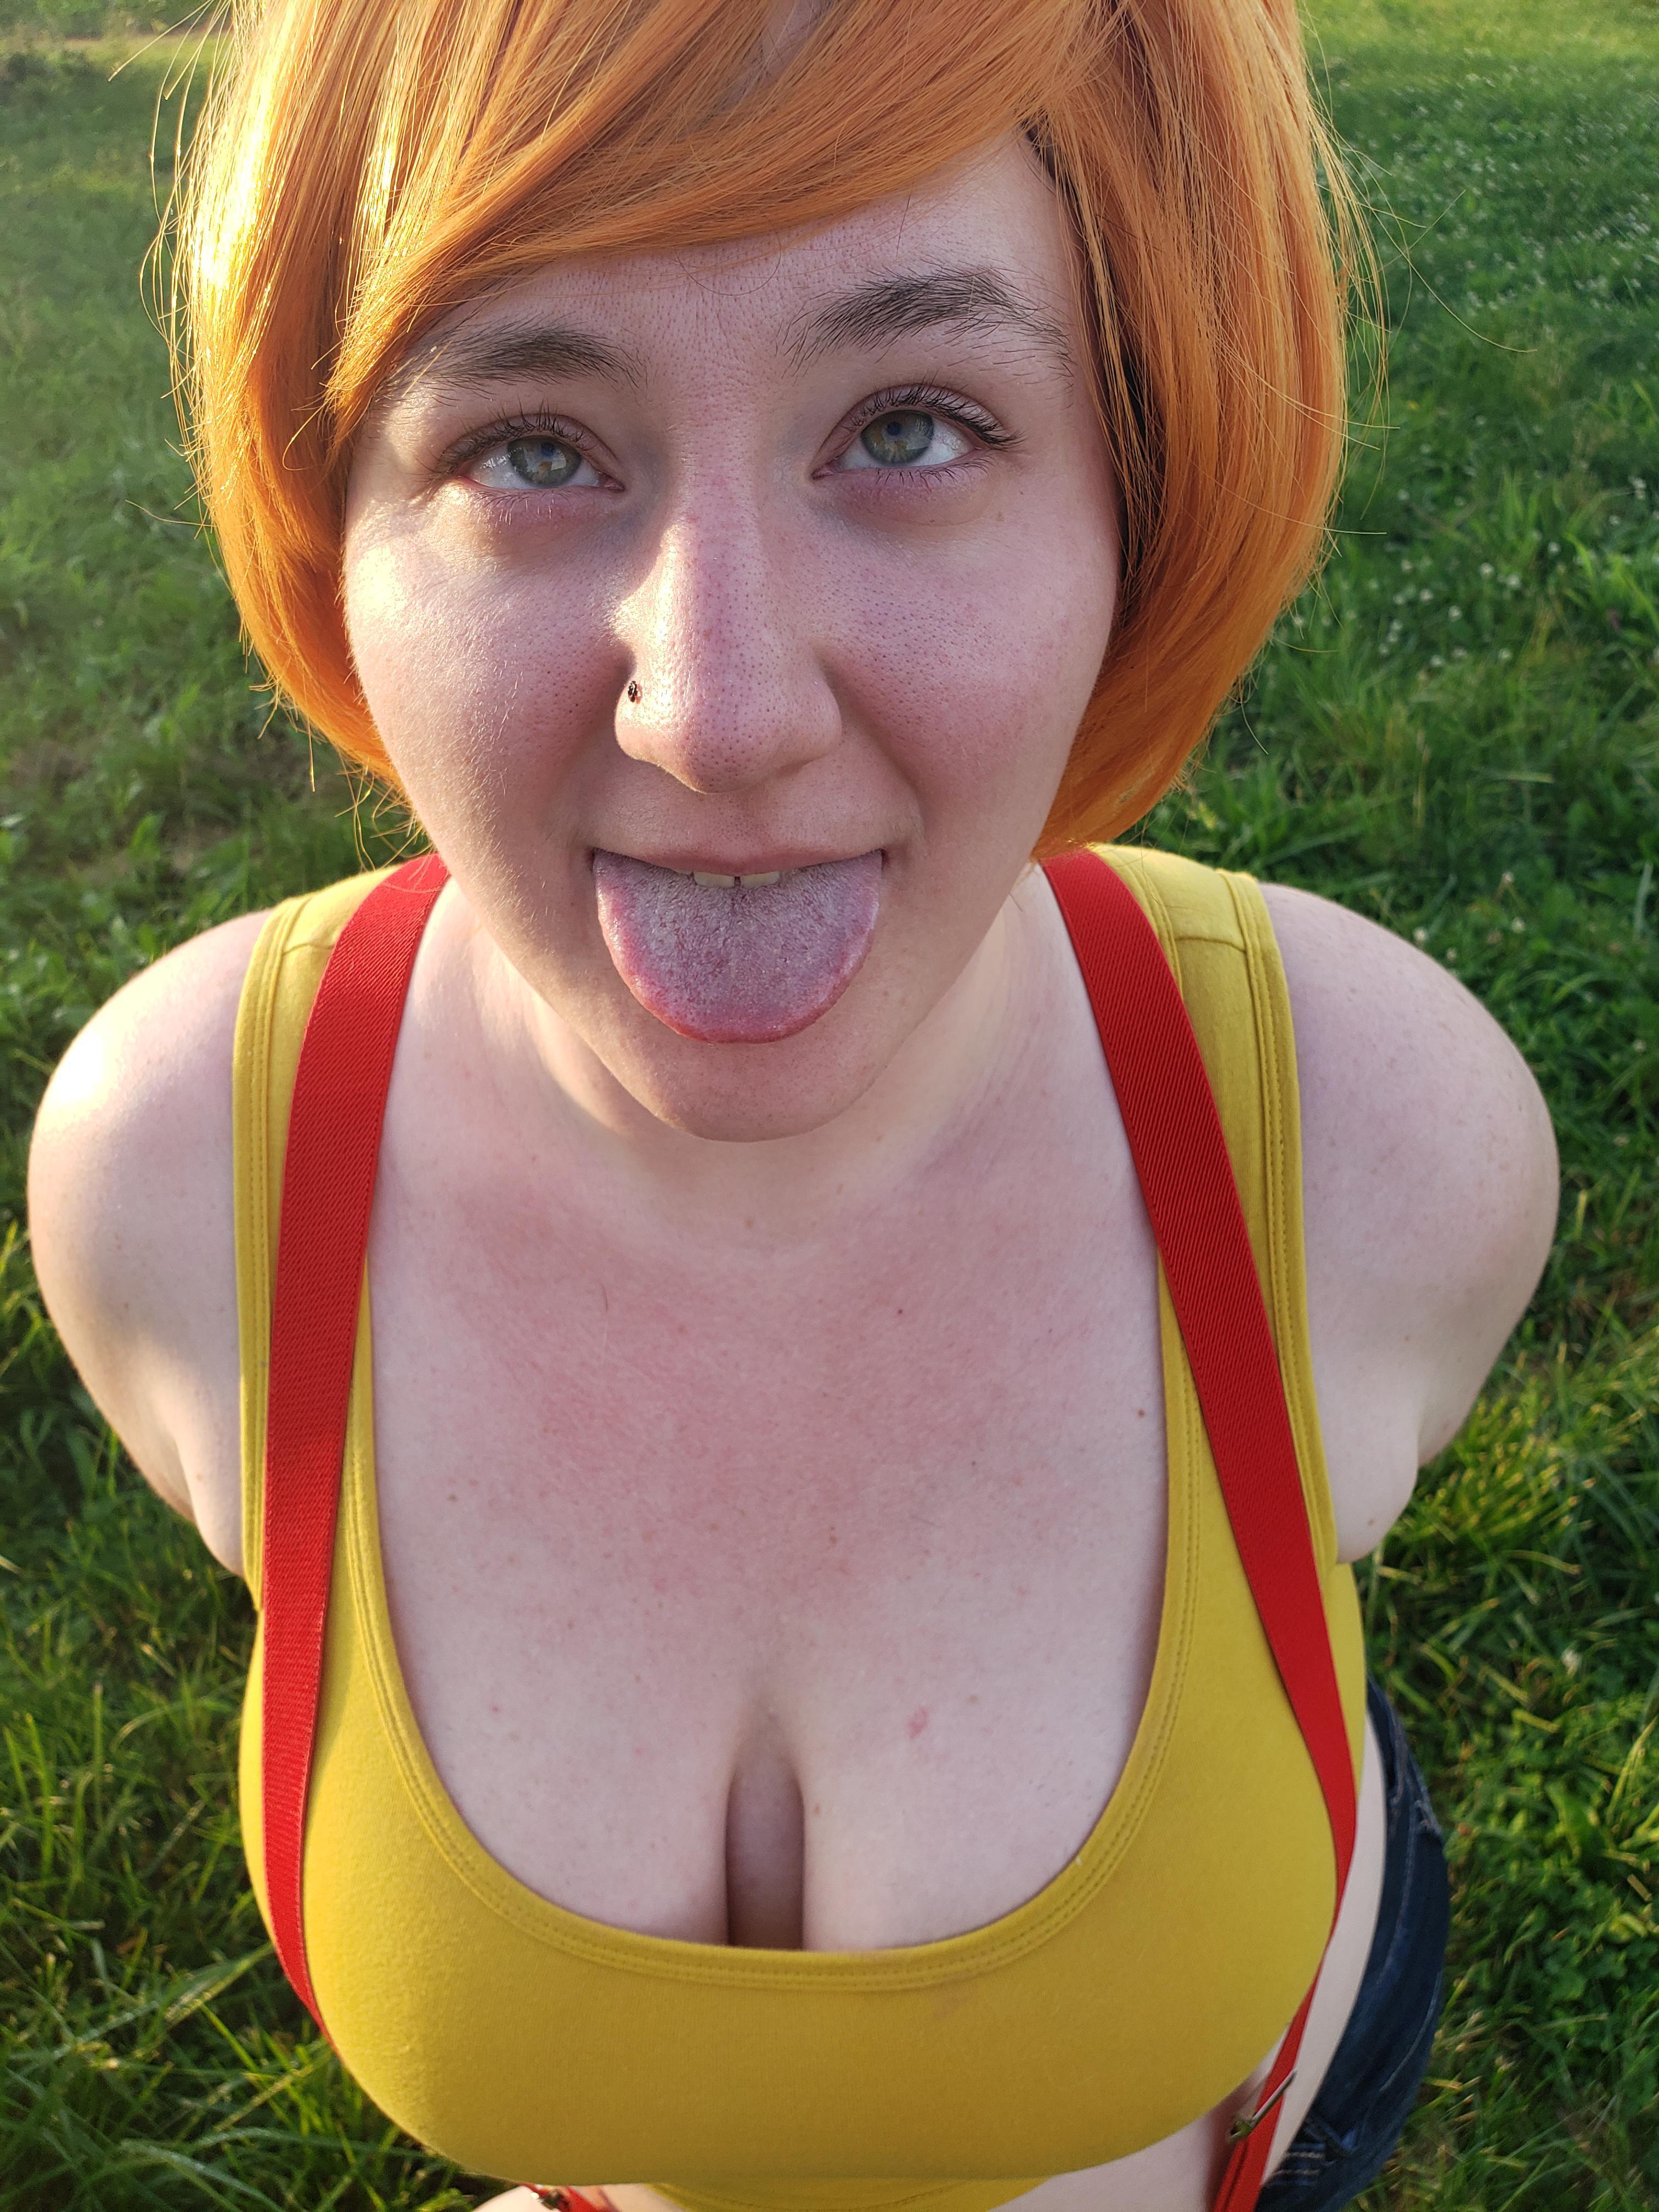 Chubby Misty Cosplay Porn - View Chubby misty porn. Kik me at foxandbearcam or snap me at edawn911 for  details! for free | Simply-Cosplay